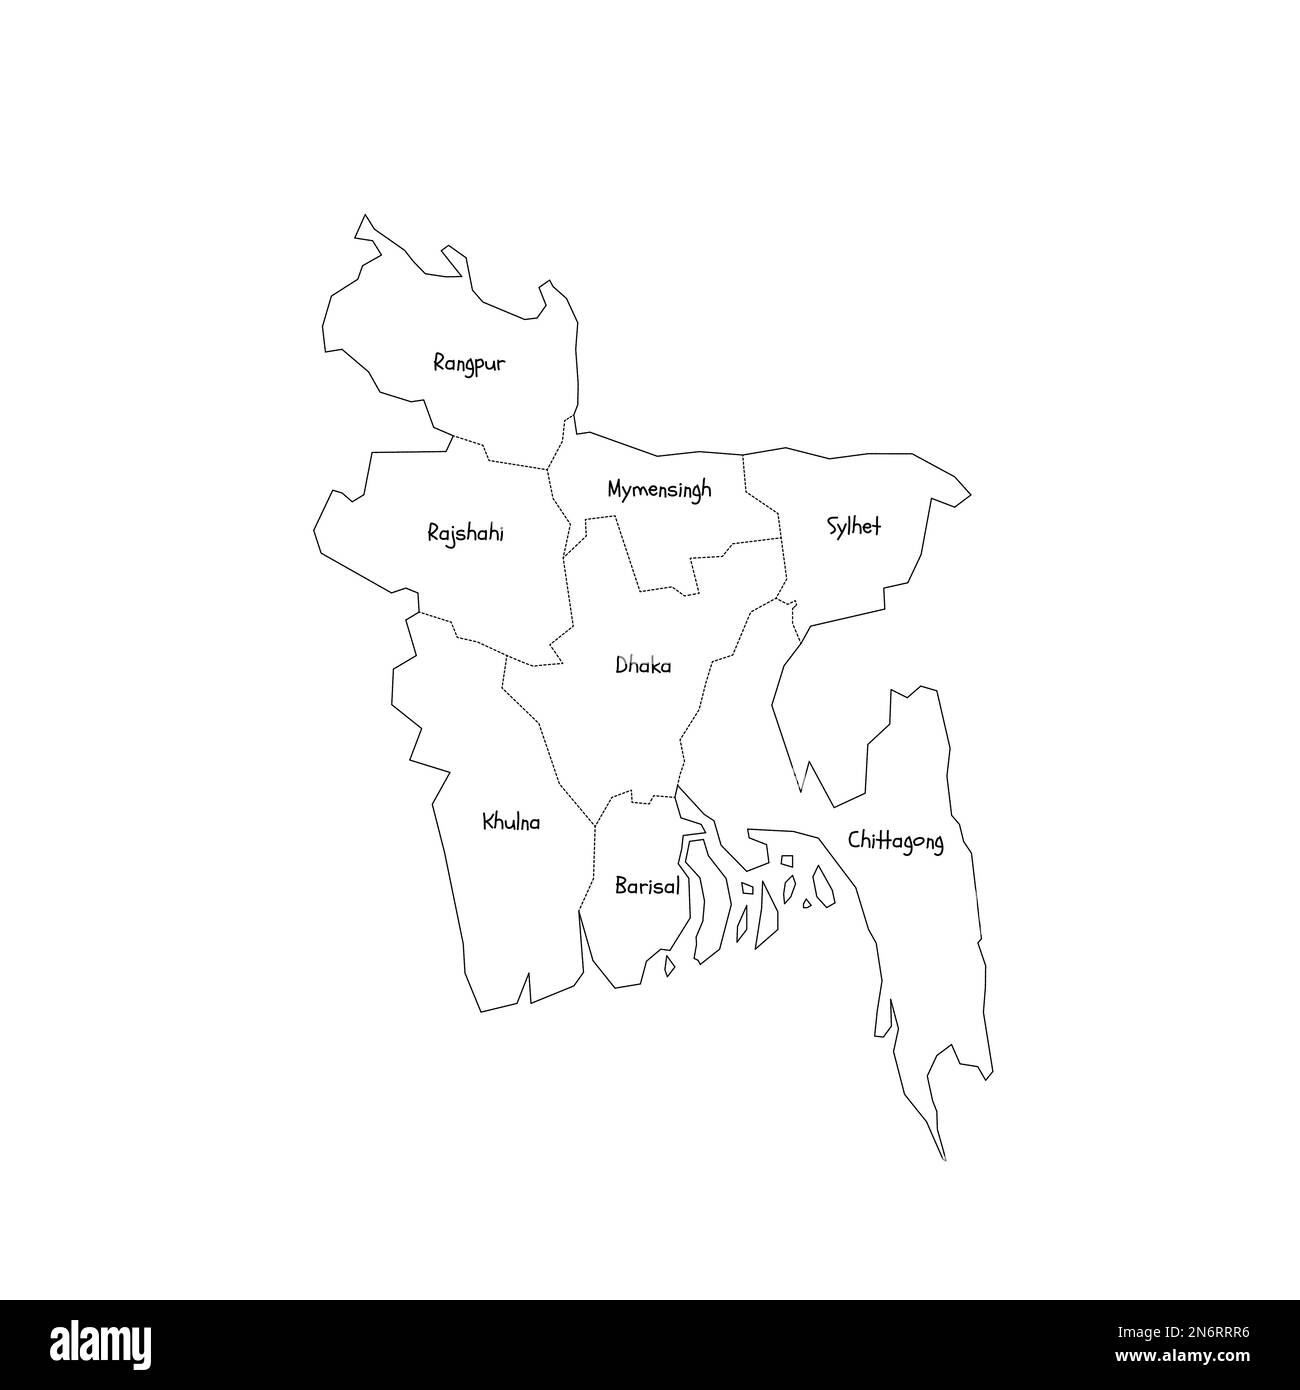 Bangladesh political map of administrative divisions - divisions. Handdrawn doodle style map with black outline borders and name labels. Stock Vector